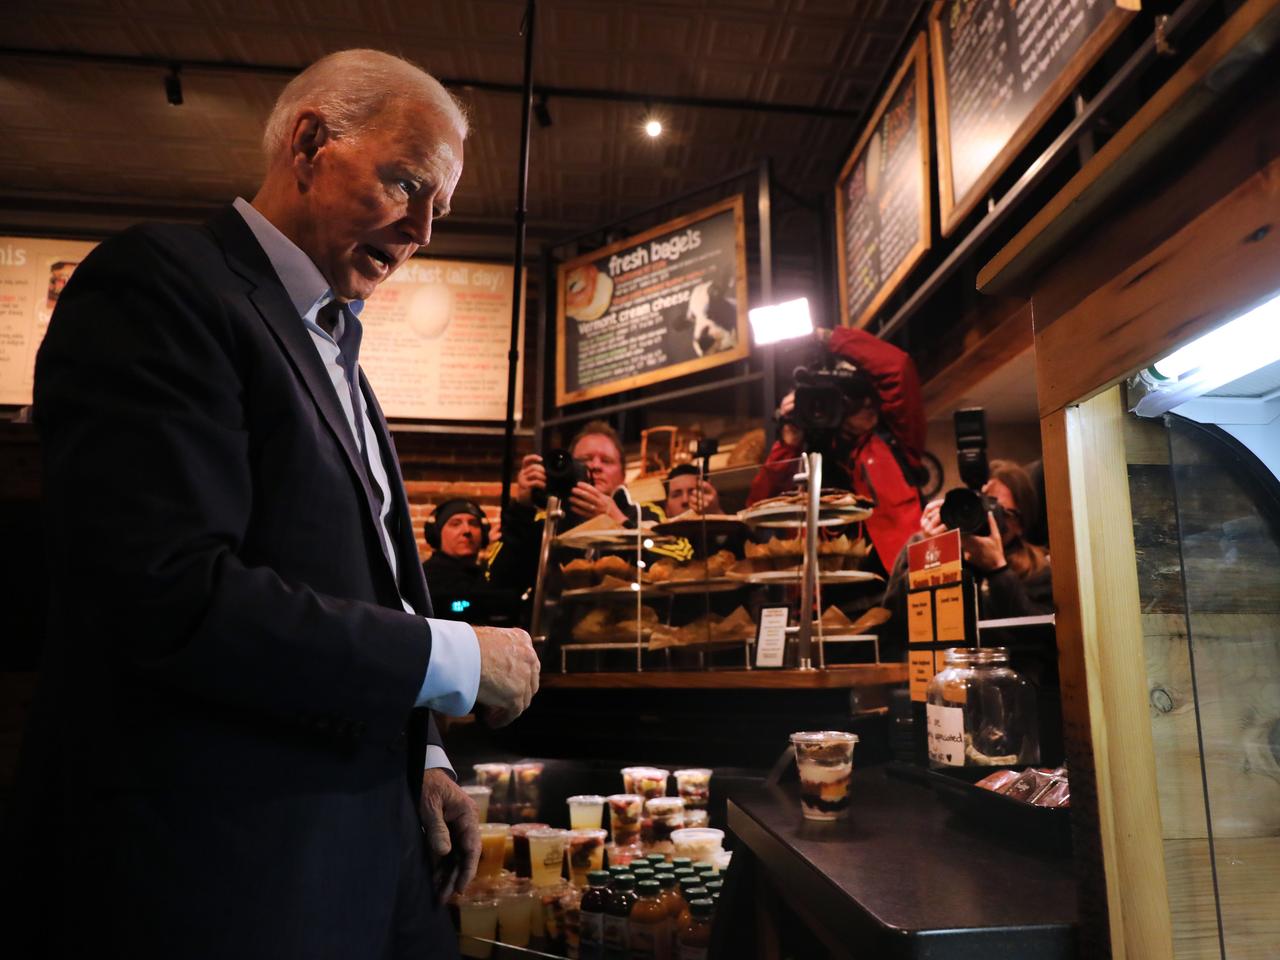 Former Vice President and Democratic presidential candidate Joe Biden visits a coffee shop on May 14, 2019 in Concord, New Hampshire.